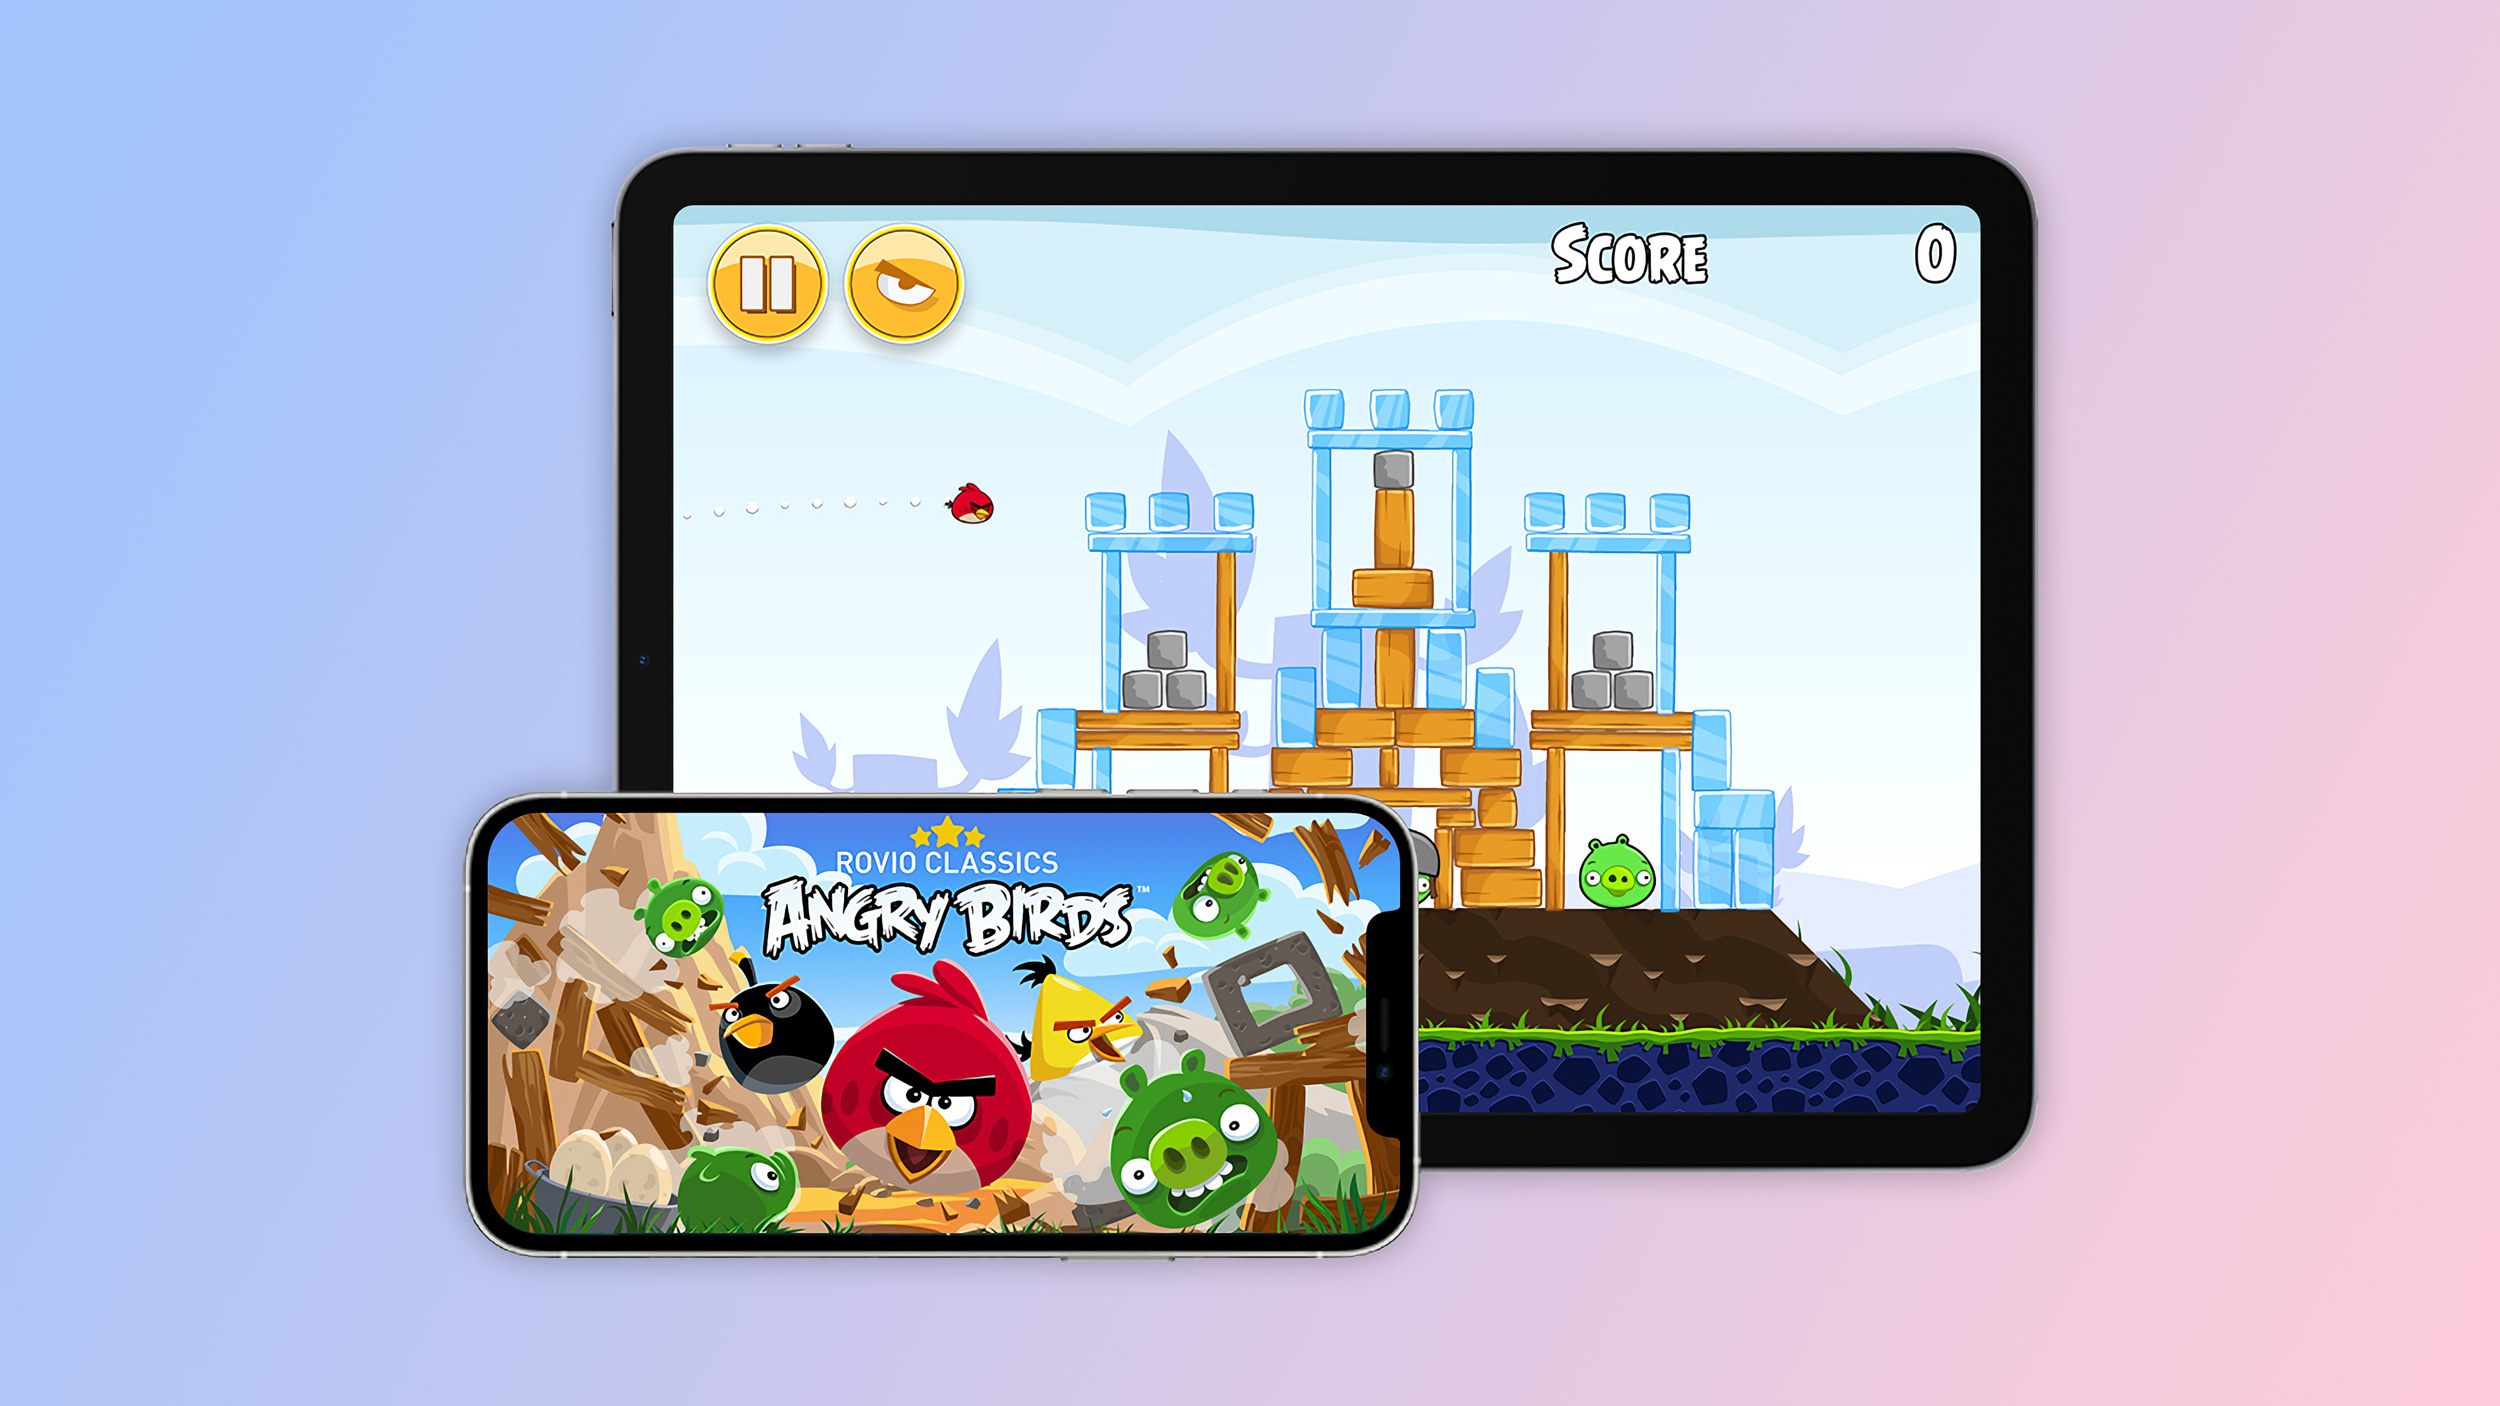 Rovio Releases Angry Birds 2 to Google Play, Complete With Magic Spells and  Boss Piggies